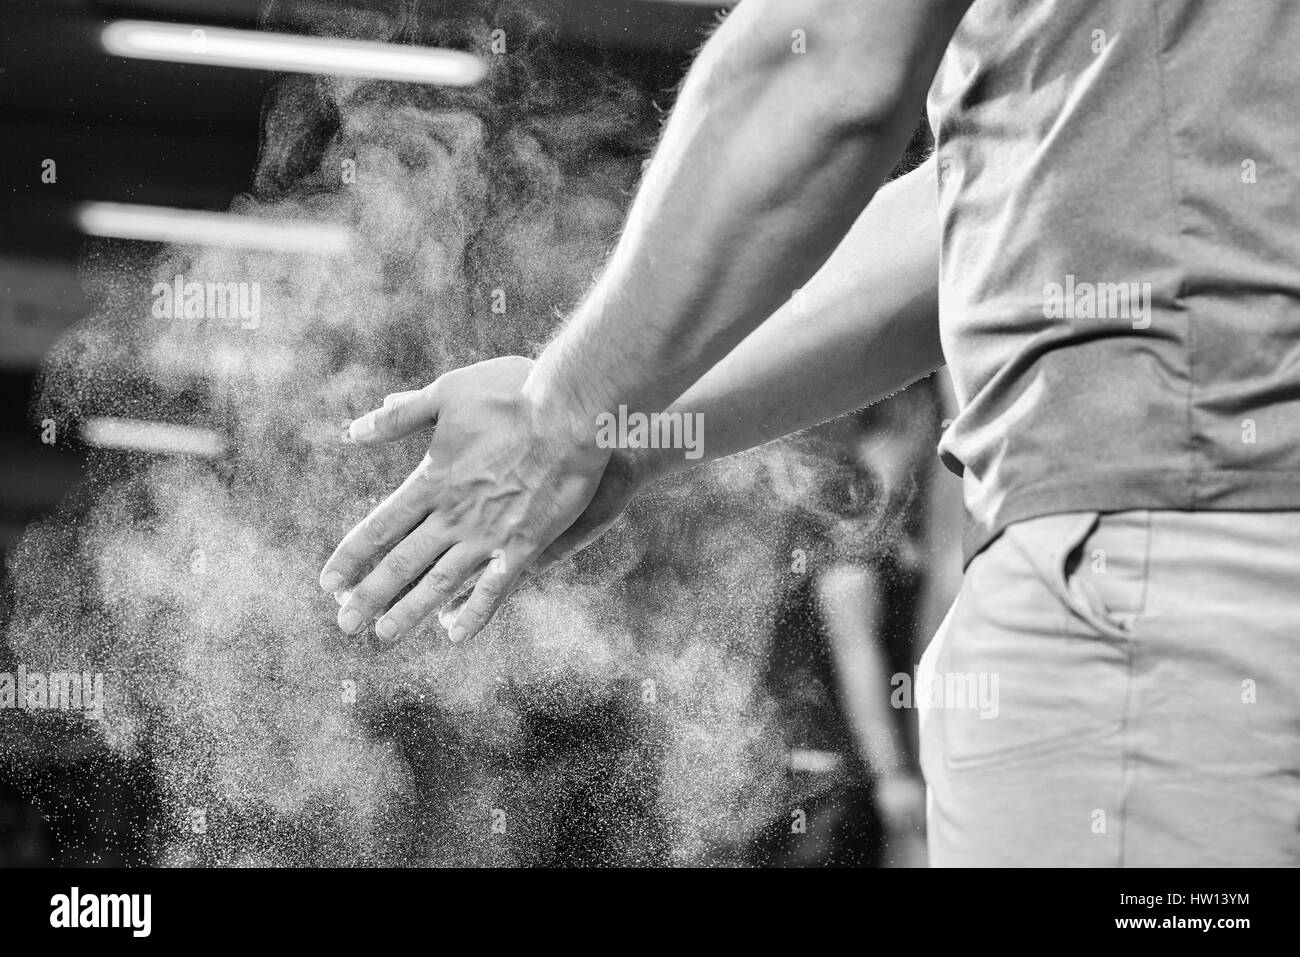 Gym chalk Black and White Stock Photos & Images - Alamy